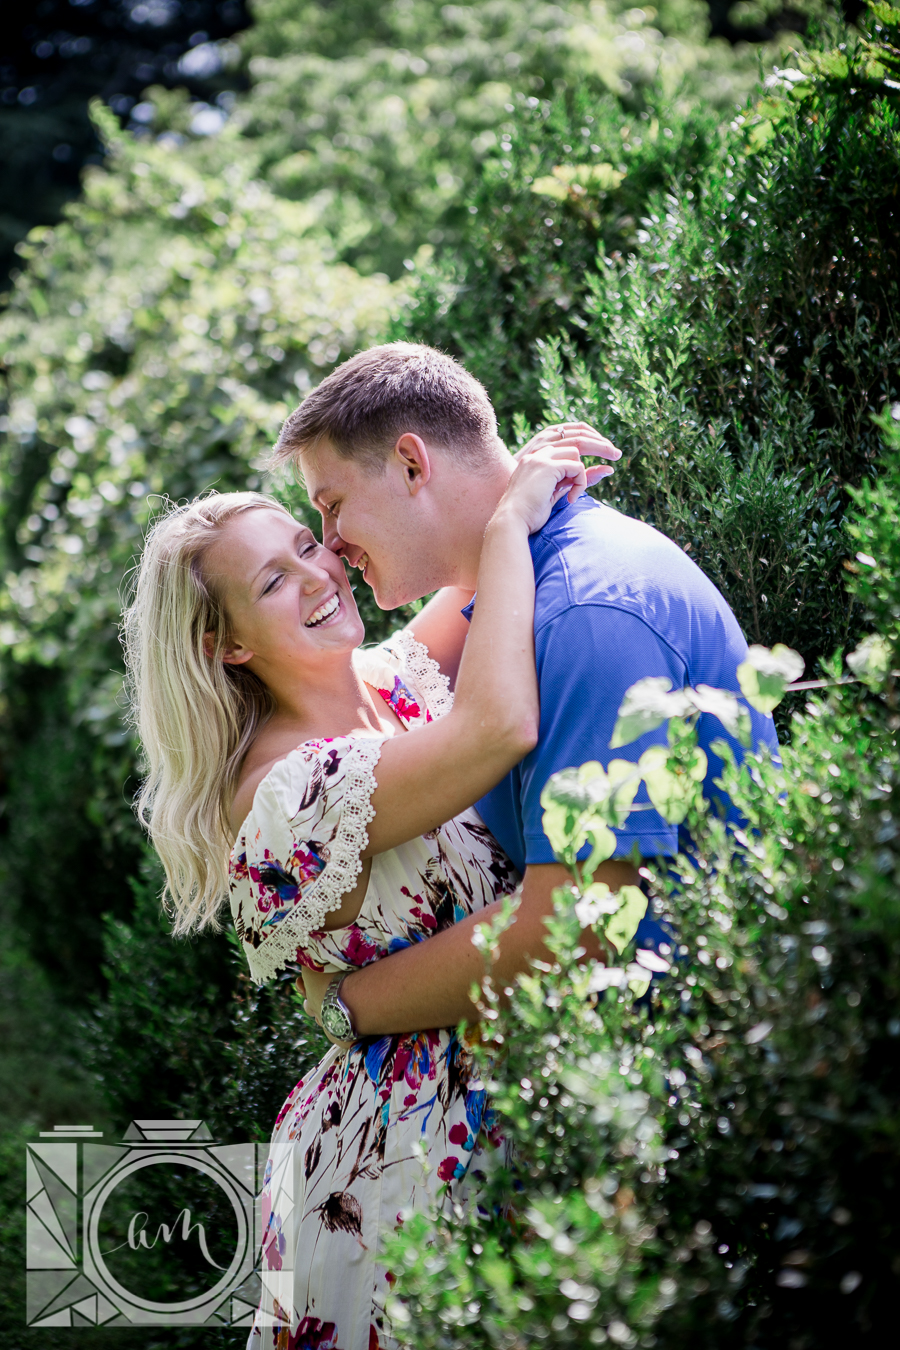 Her hands around his neck laughing engagement photo by Knoxville Wedding Photographer, Amanda May Photos.